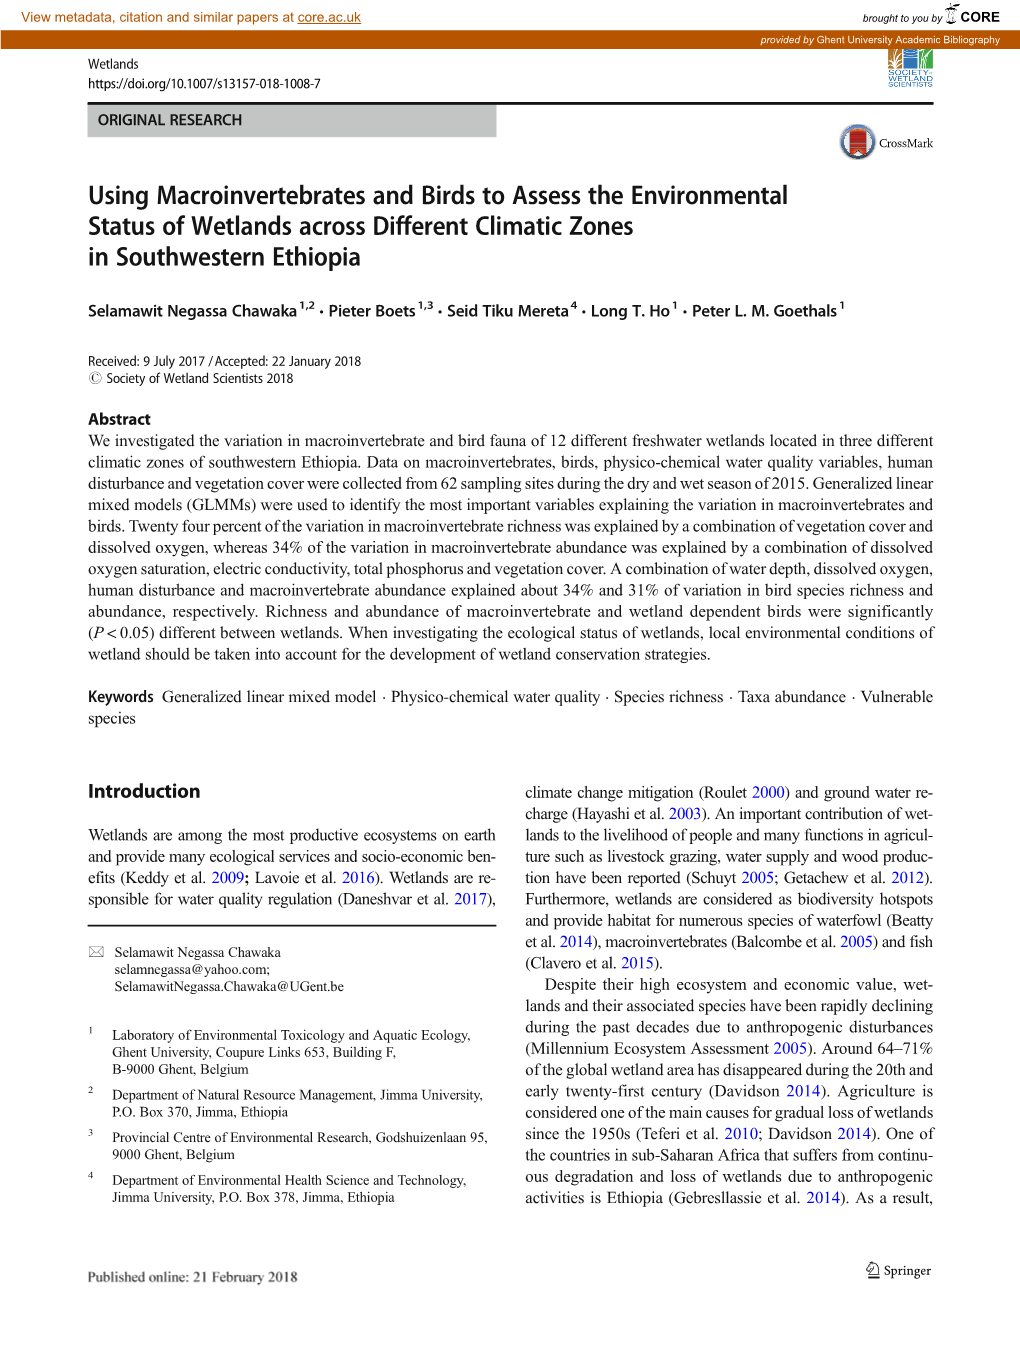 Using Macroinvertebrates and Birds to Assess the Environmental Status of Wetlands Across Different Climatic Zones in Southwestern Ethiopia